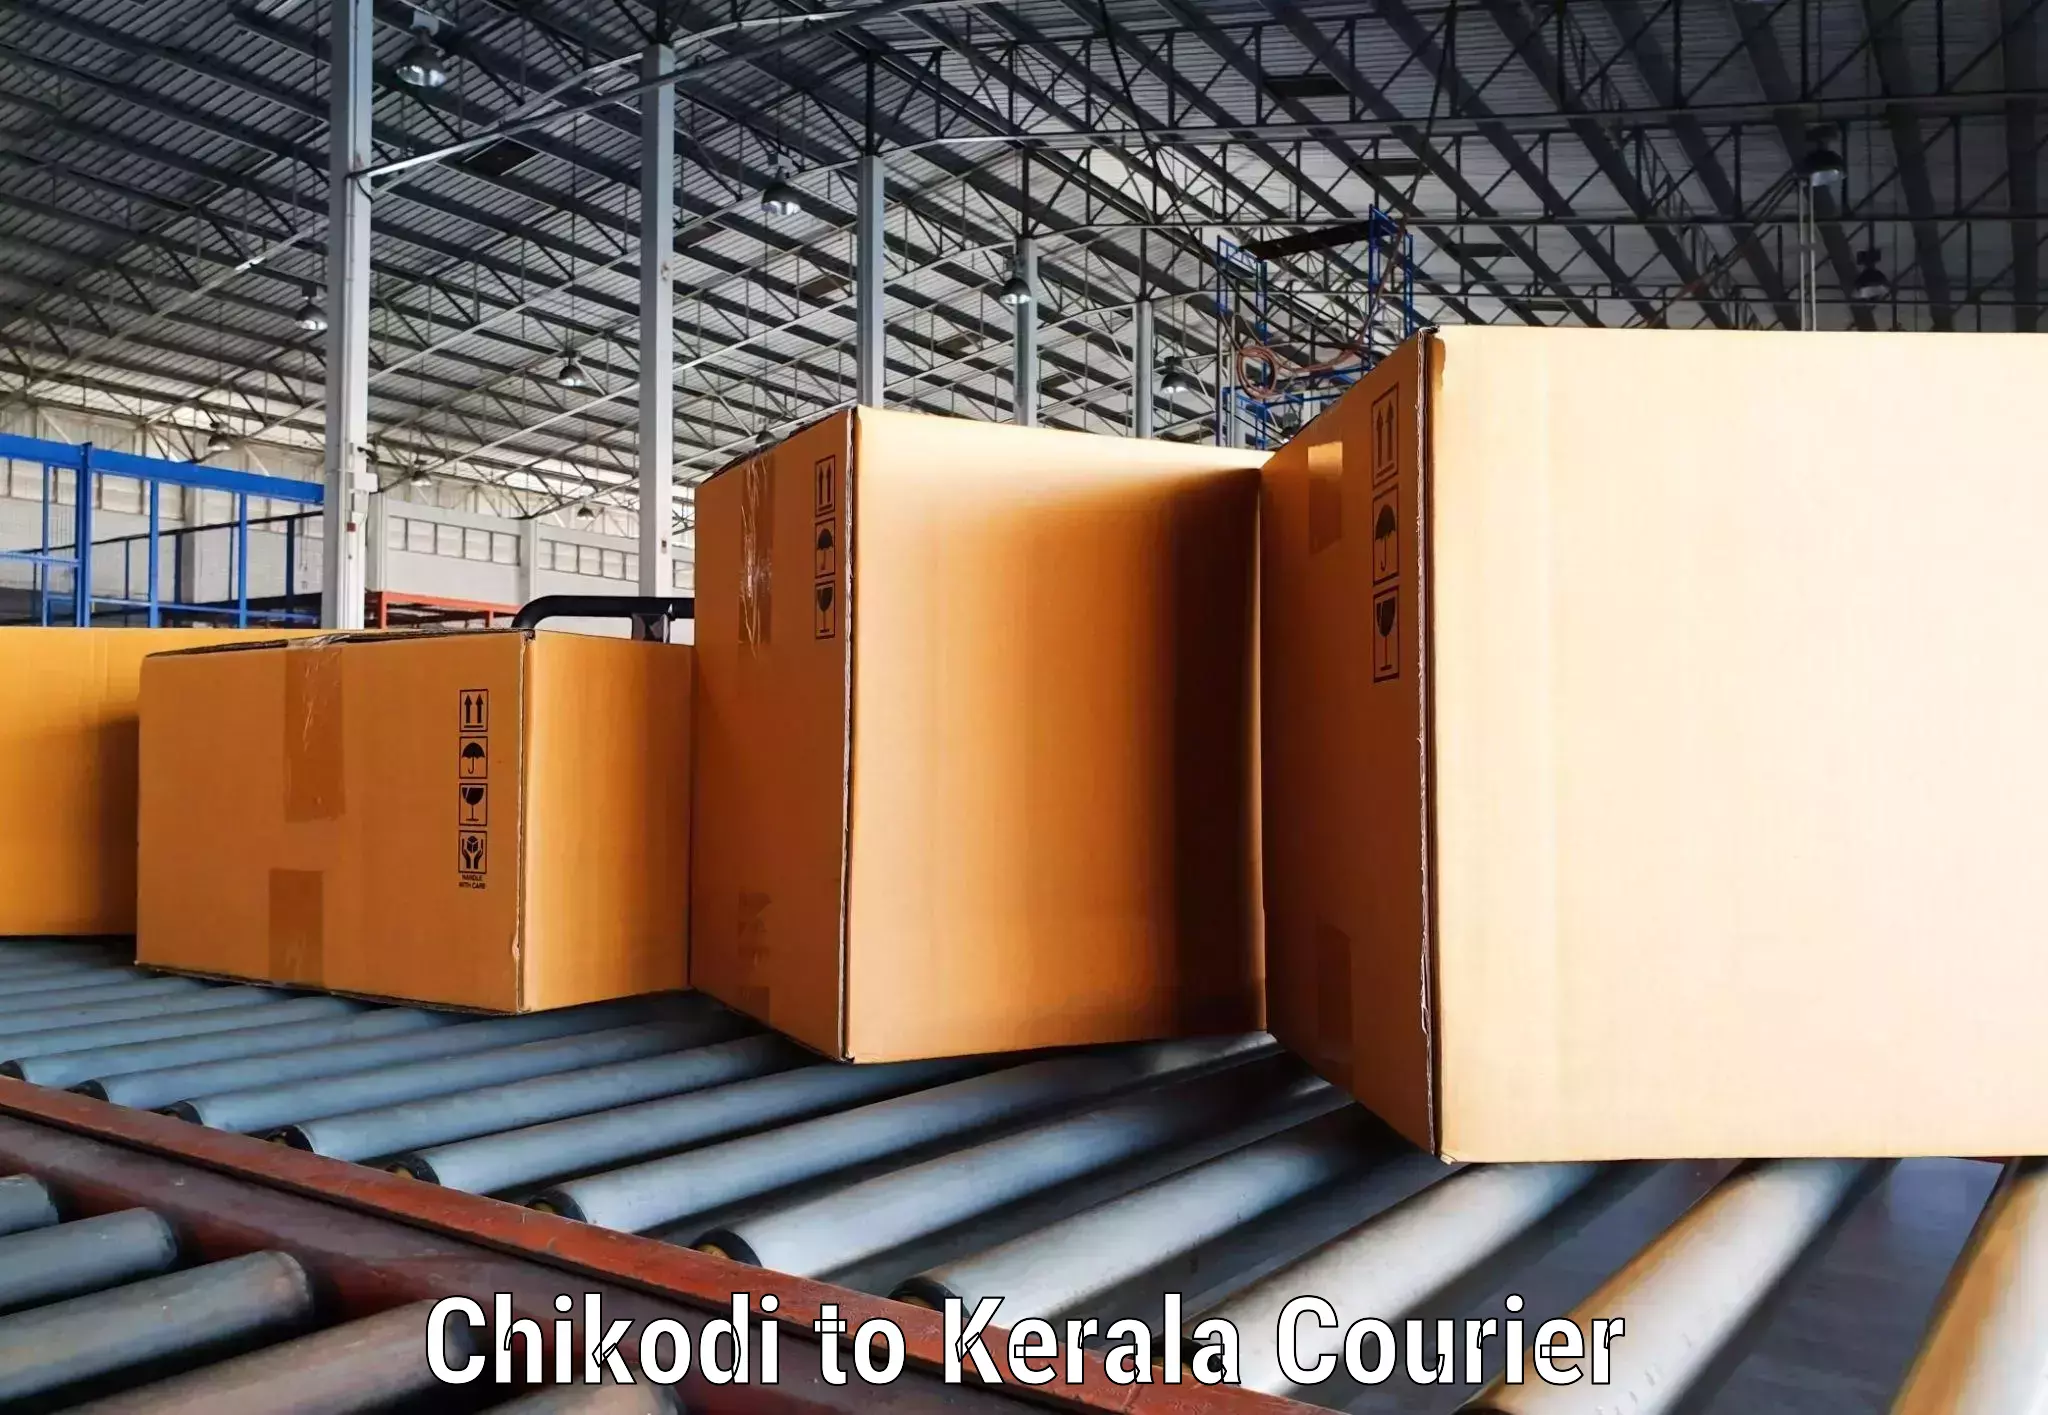 Fastest parcel delivery Chikodi to Trivandrum